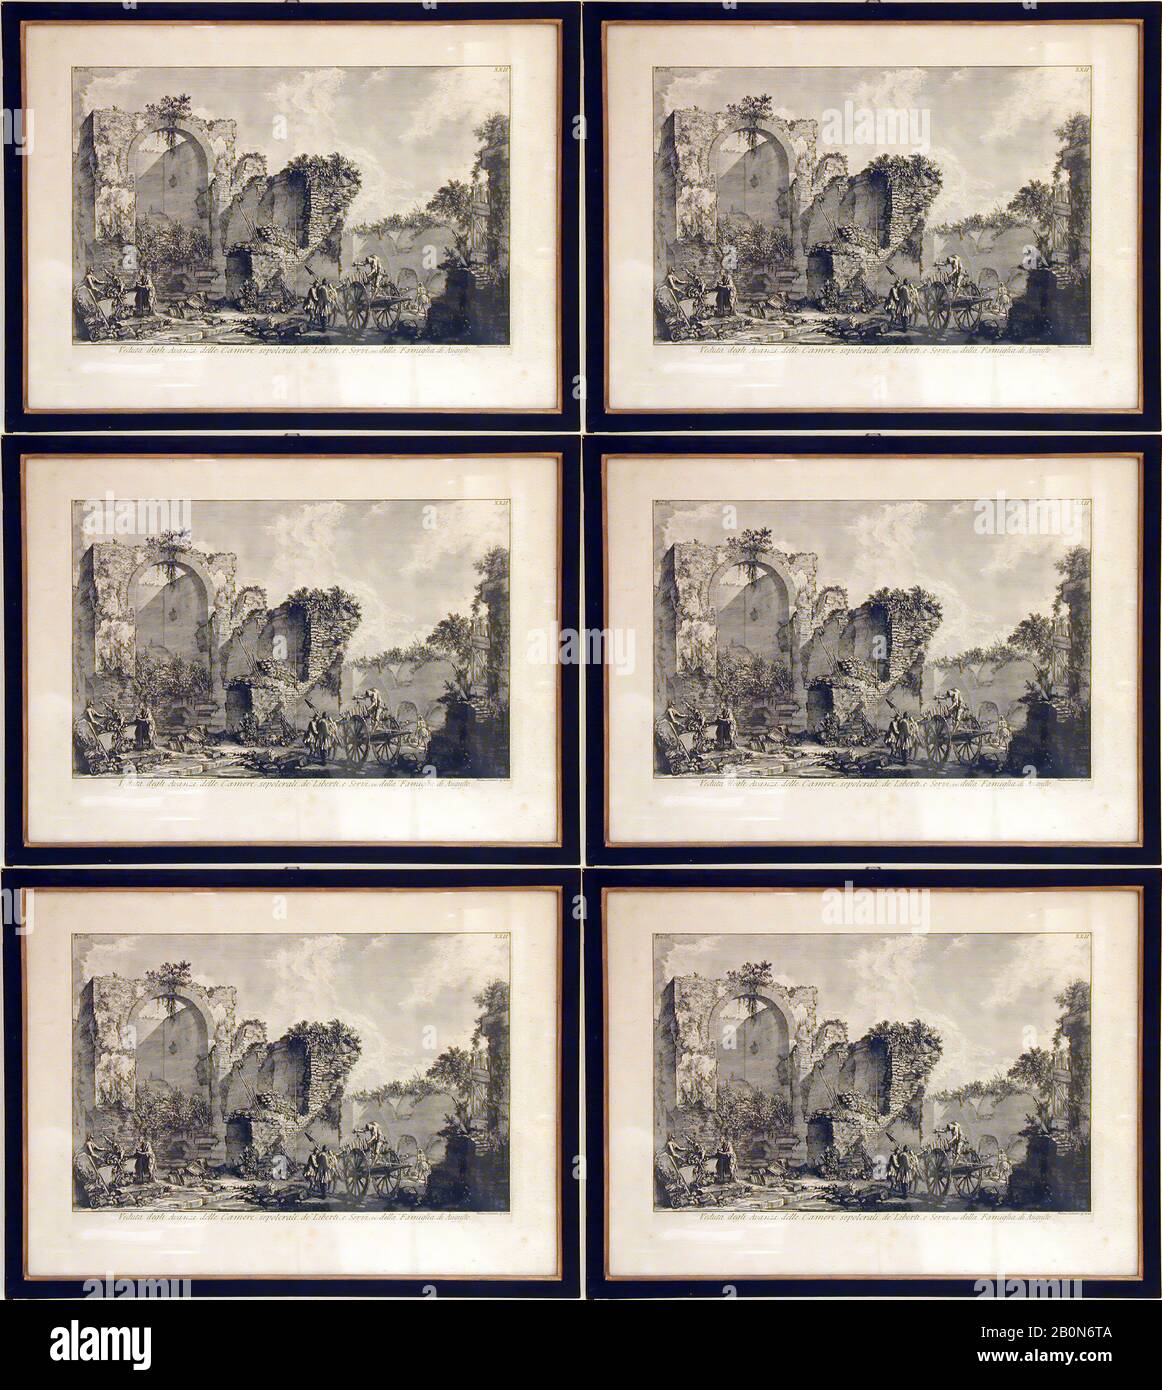 Six engravings and one map, 18th century, Ink on paper, 1. Overall: 23 x 30 in. (58.4 x 76.2 cm), 2. Overall: 19 x 23 in. (48.3 x 58.4 cm), 3. Overall: 19 x 23 in. (48.3 x 58.4 cm), 4. Overall: 19 x 23 in. (48.3 x 58.4 cm), 5. Overall: 13 1/2 x 17 3/4 in. (34.3 x 45.1 cm), 6. Overall: 18 1/2 x 11 3/4 in. (47 x 29.8 cm), 7. Overall: 21 3/4 x 24 1/2 in. (55.2 x 62.2 cm), Miscellaneous-Paintings Stock Photo